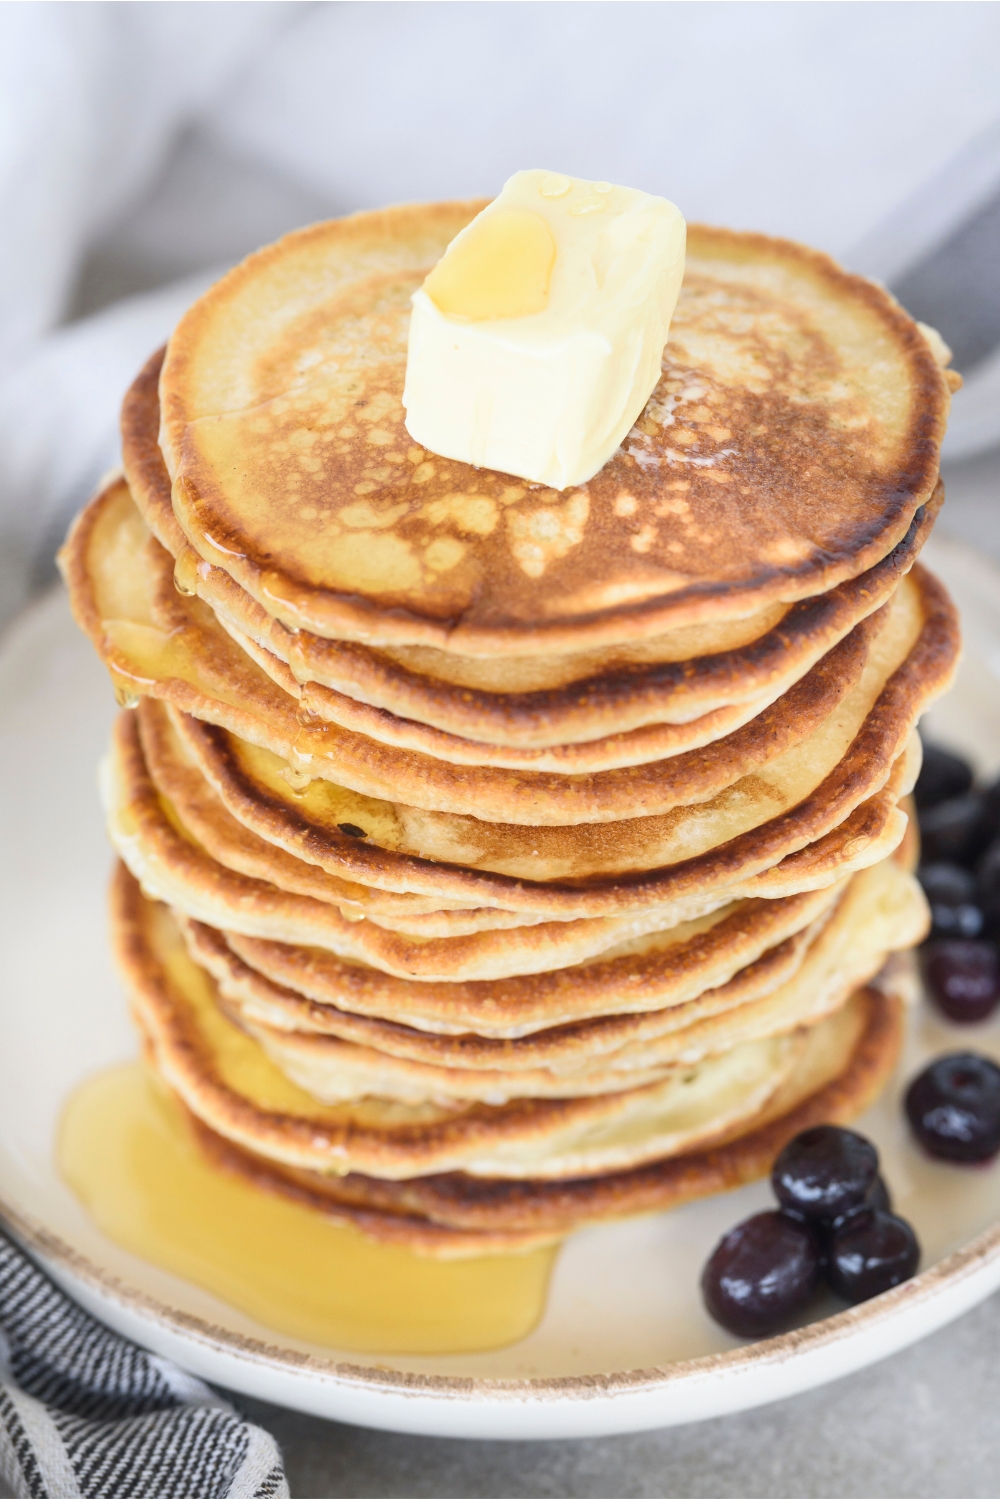 A cube of butter that is on a big stack of pancakes that is on a plat with blueberries.